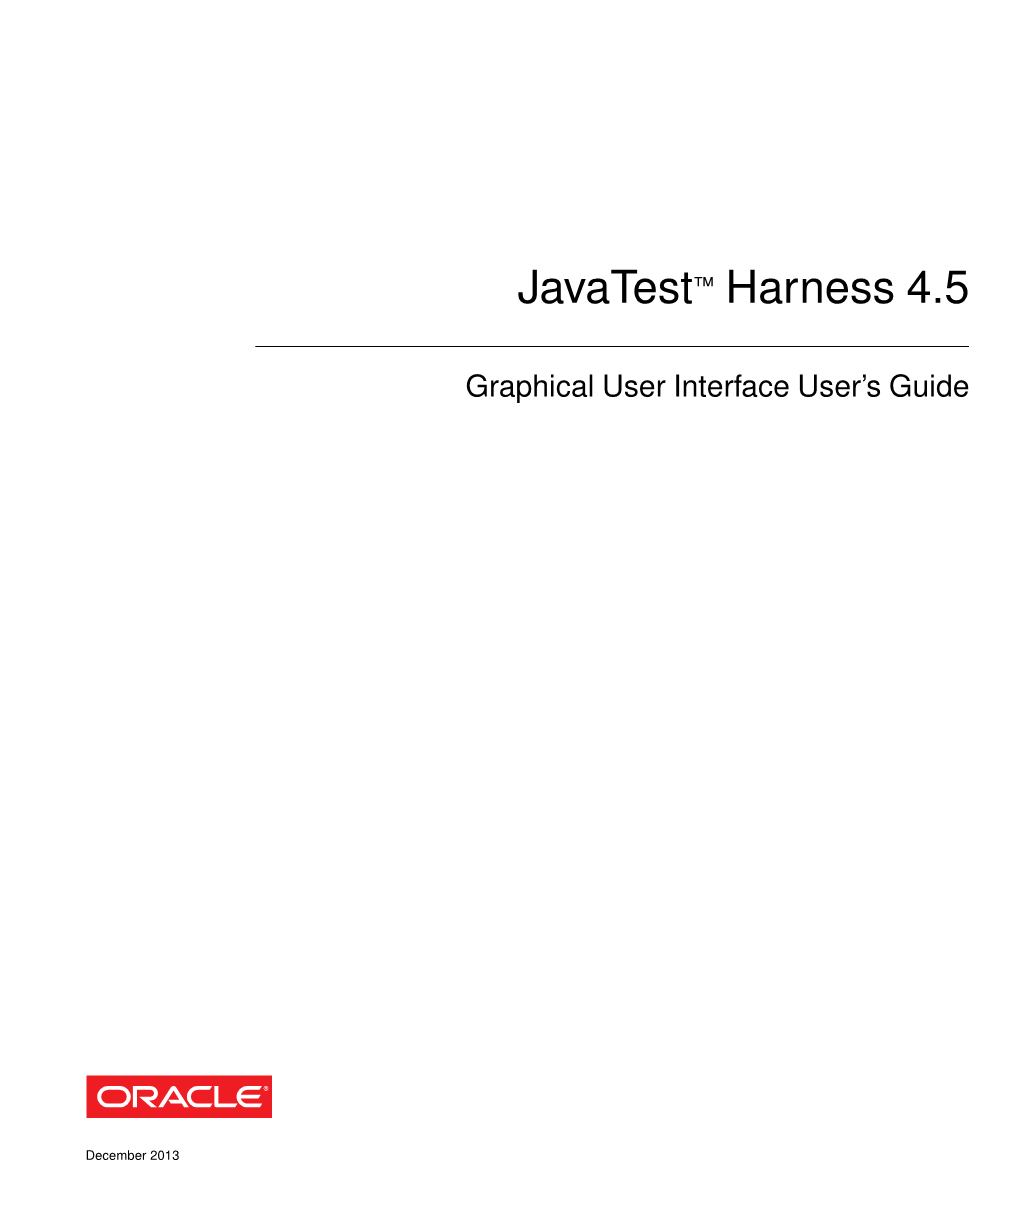 Javatest™ Harness (The Harness) to Run Tests of the Test Suite, Browse Results, and Write Reports Test Results